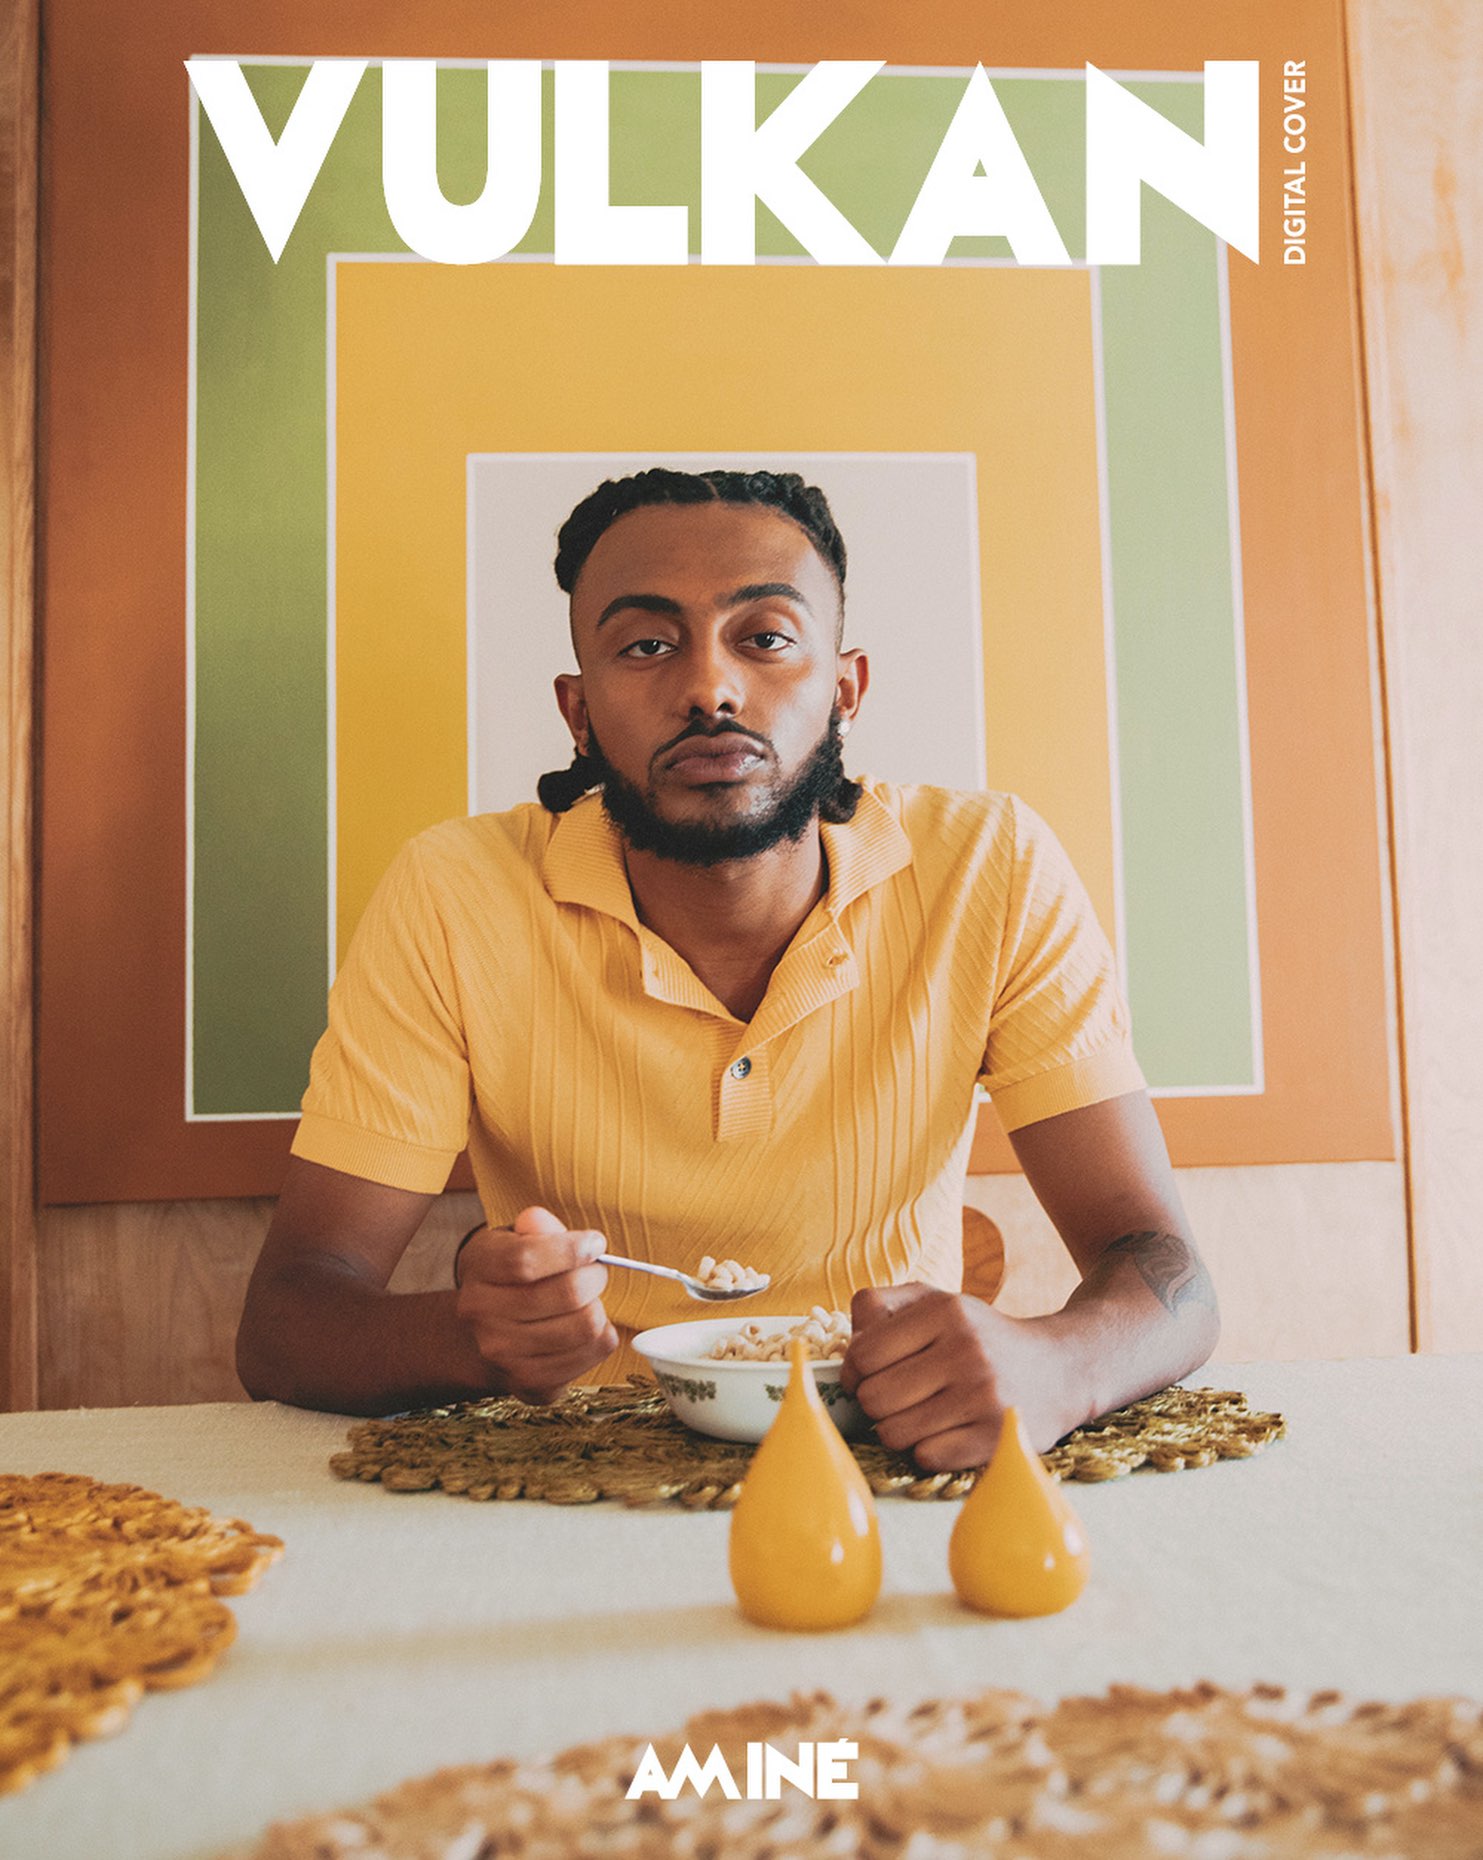 ARTUTO TORRES shoots Aminé for the cover of Vulkan magazine.